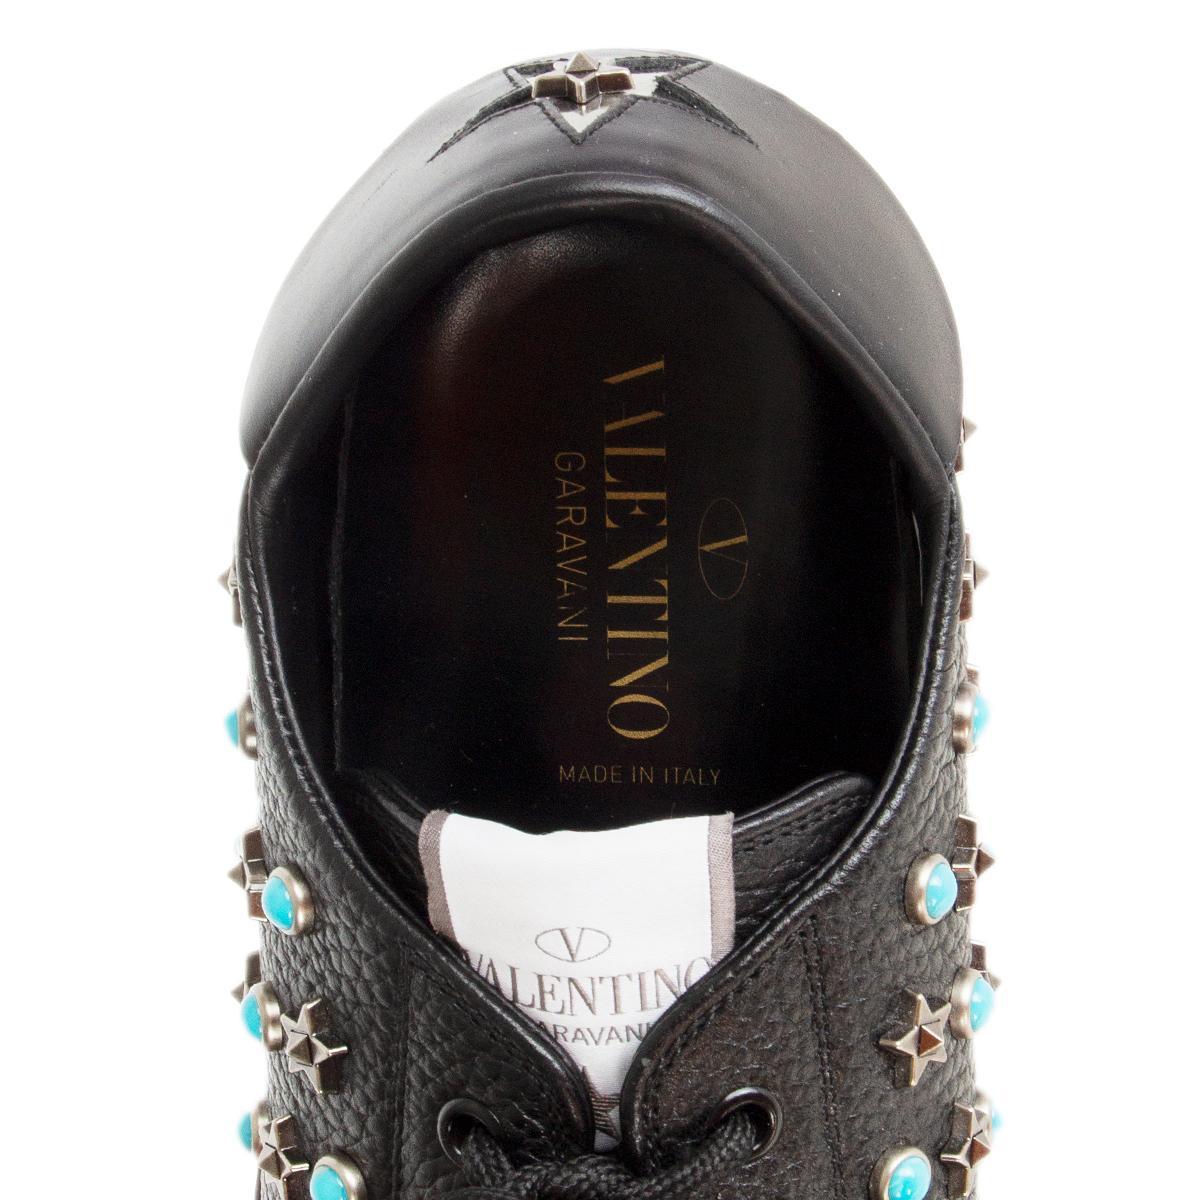 VALENTINO black leather STAR STUDDED Sneakers Shoes 41 2